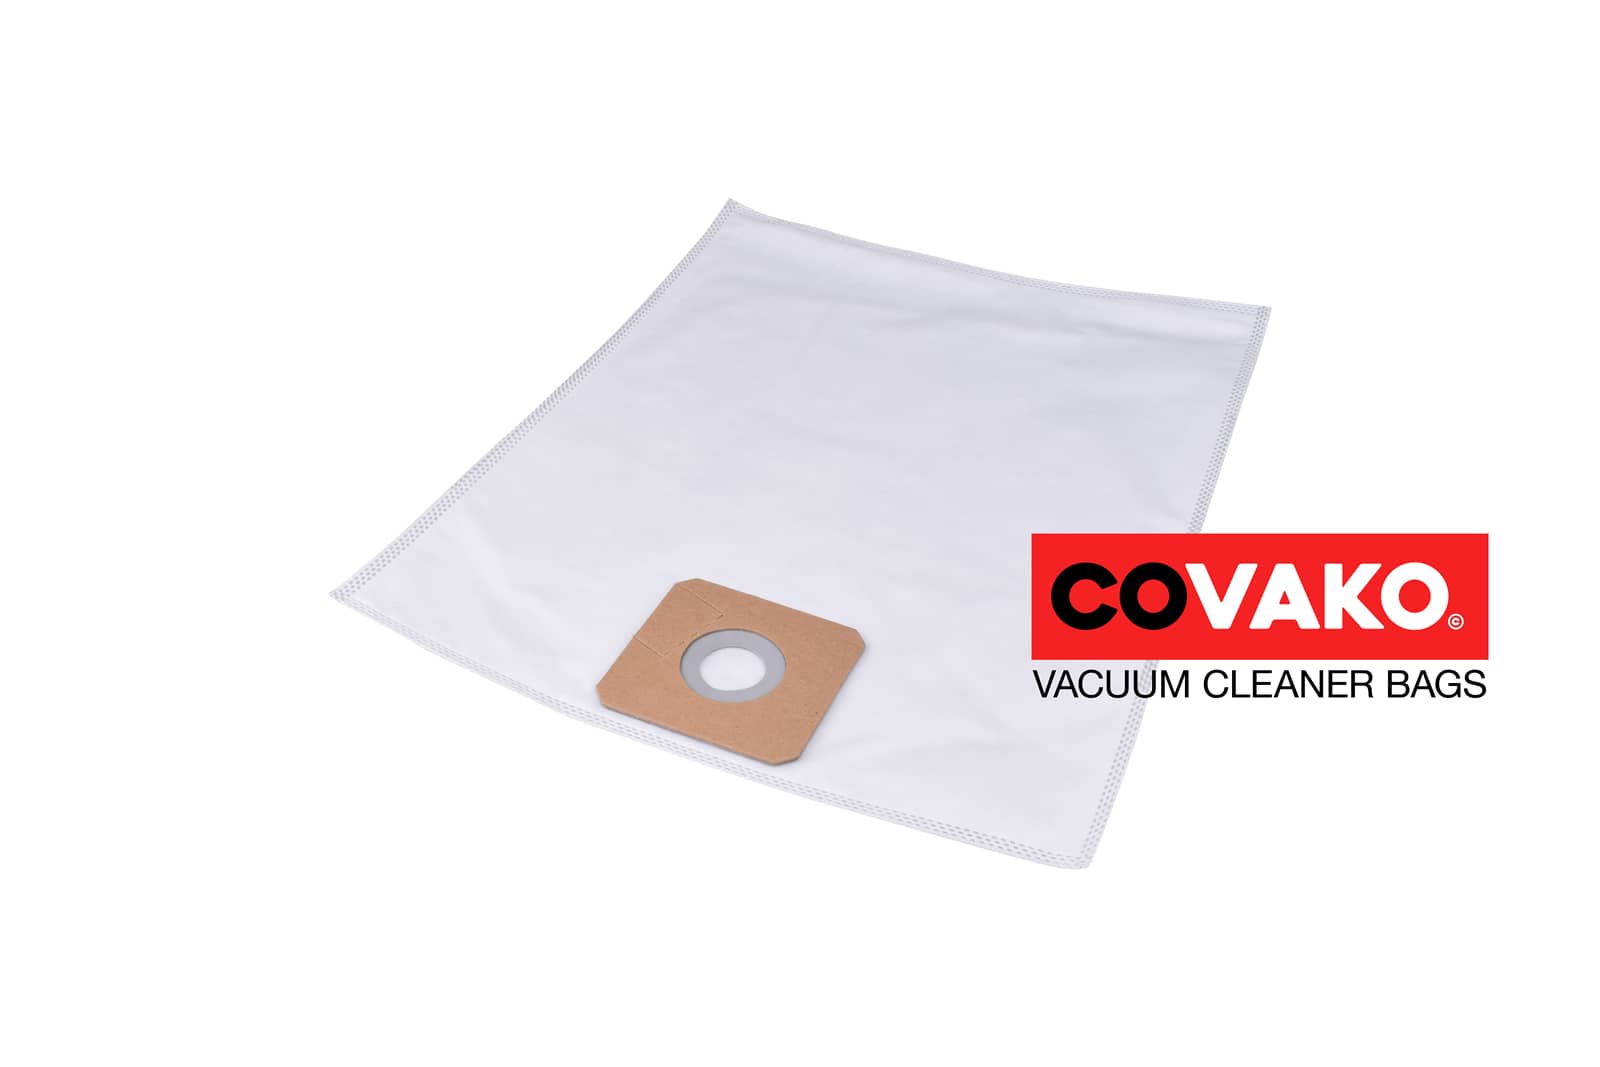 Vermop Jetvac SD 12 / Synthesis - Vermop vacuum cleaner bags